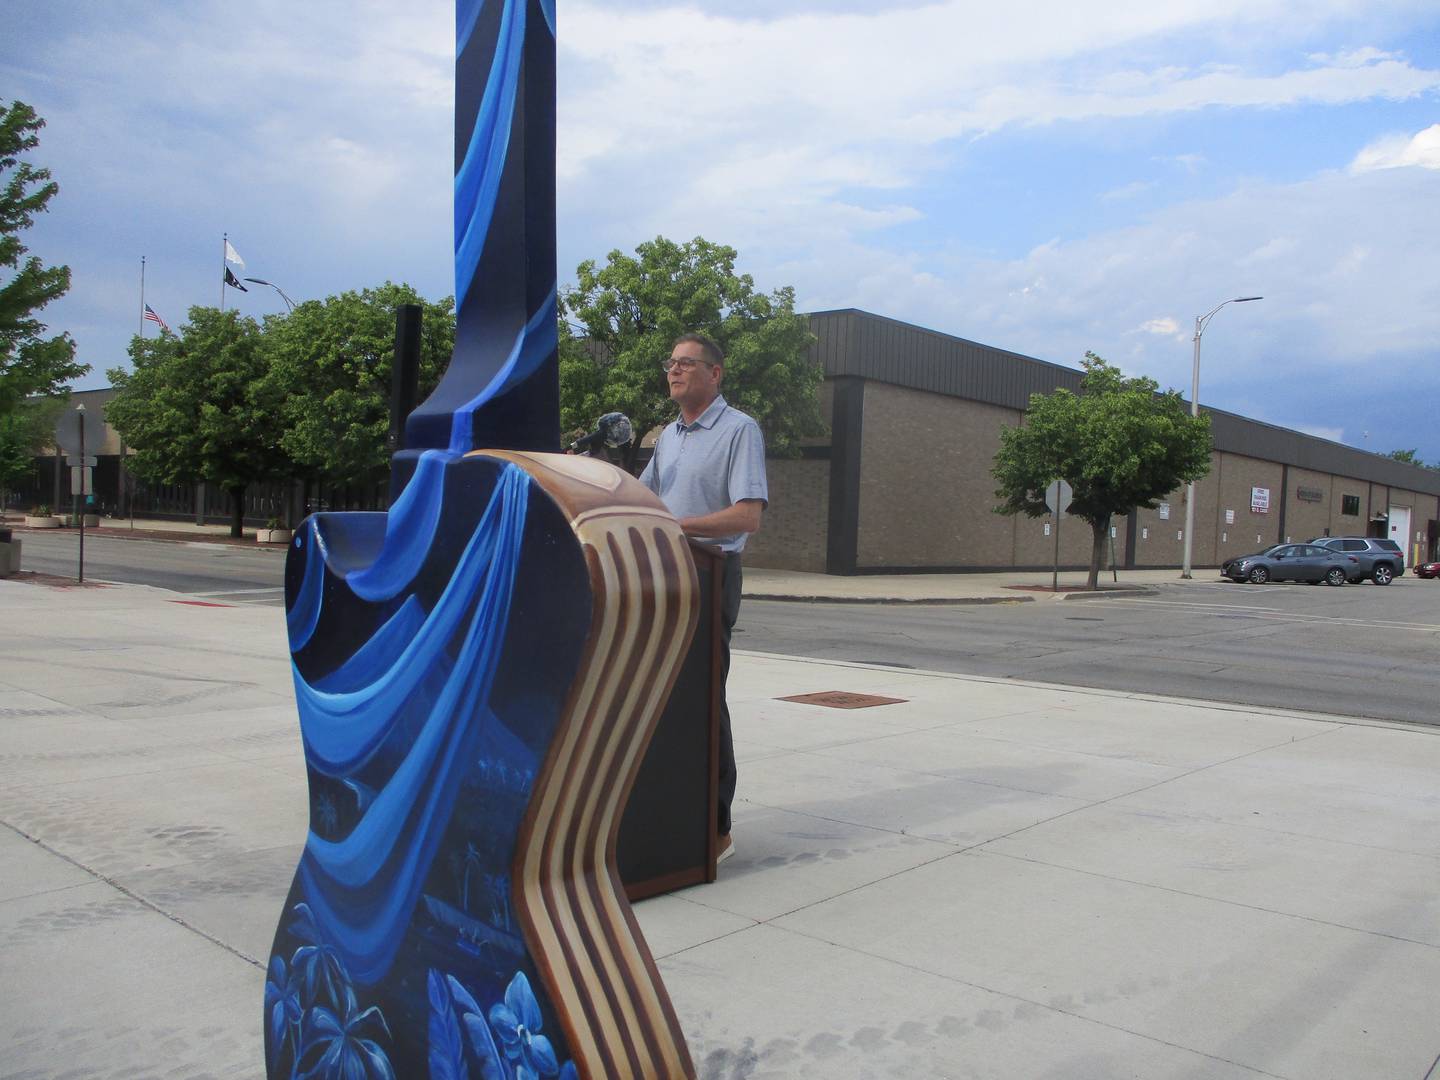 Rod Tonelli, chairman of the Joliet City Center Partnership, speaks with a painted guitar in the foreground on Thursday during an opening ceremony for the "Ready to Rock" street art project in downtown Joliet, June 1, 2023.